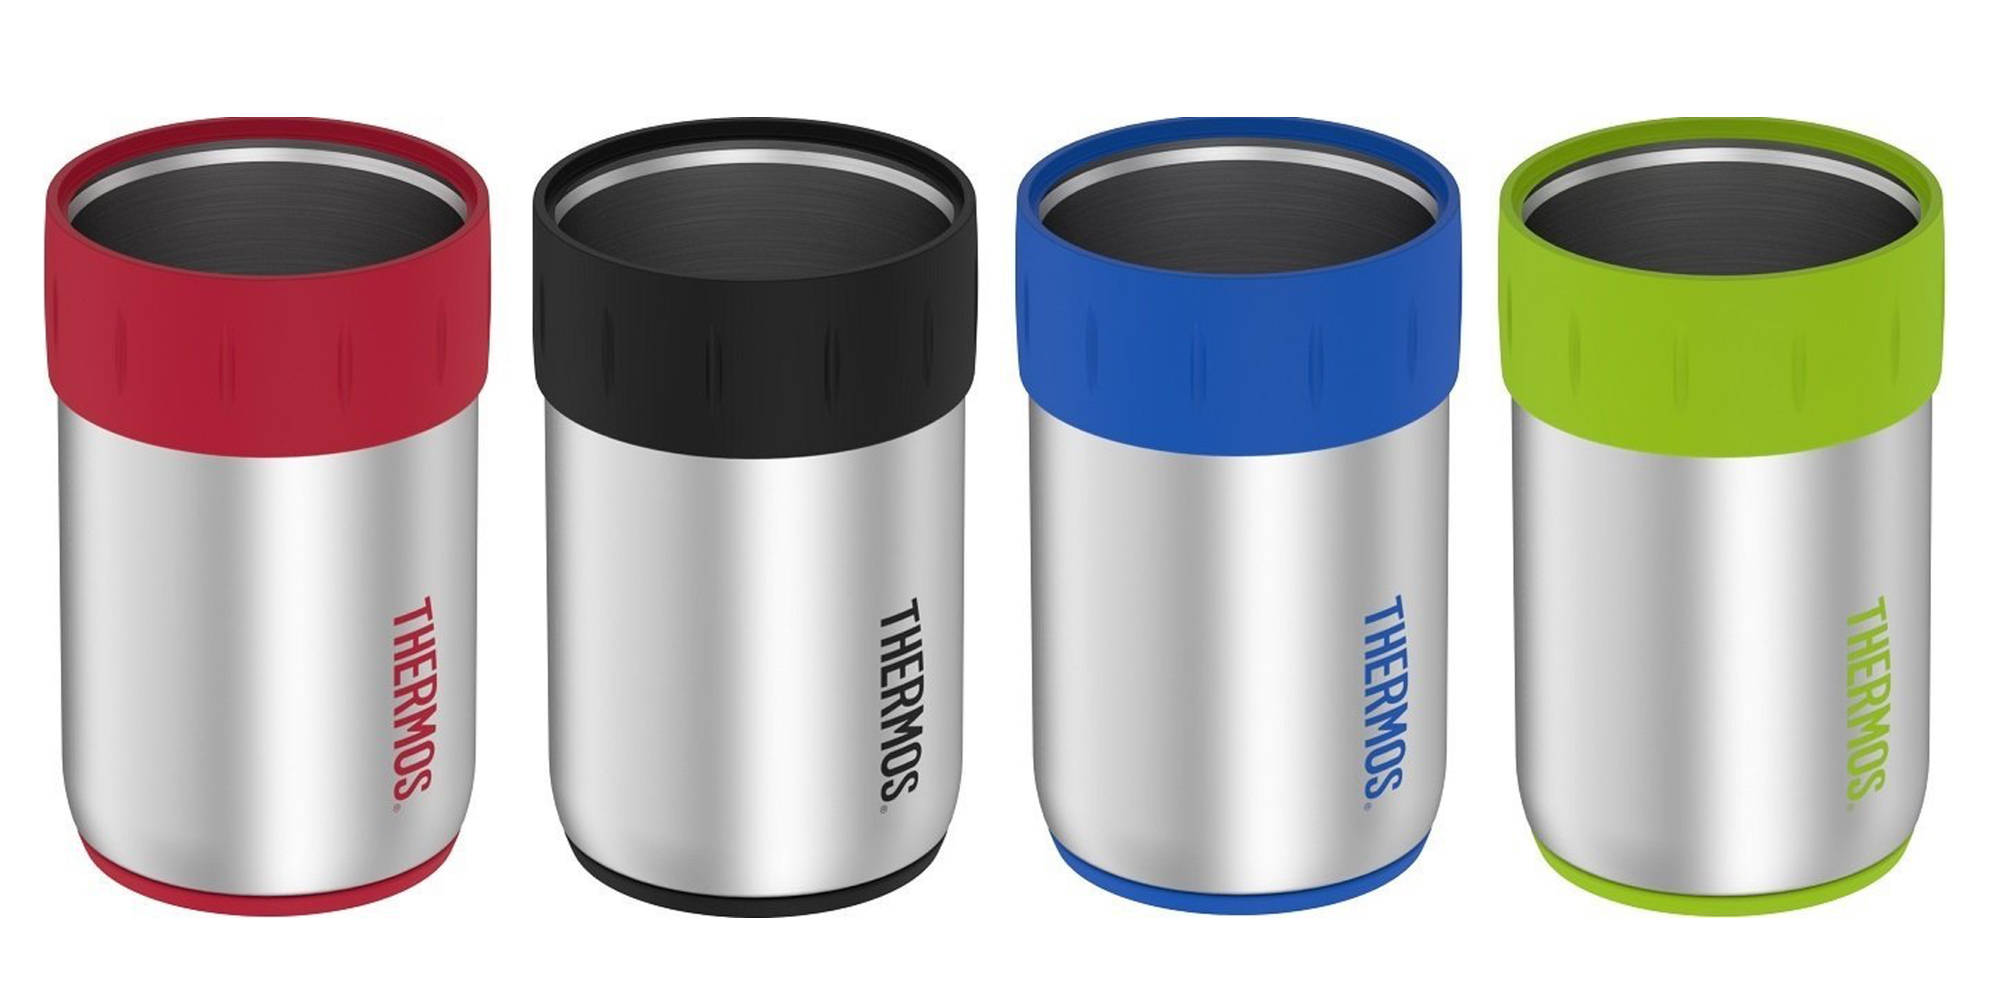 https://9to5toys.com/wp-content/uploads/sites/5/2017/07/thermos-insulated-can-holder.jpg